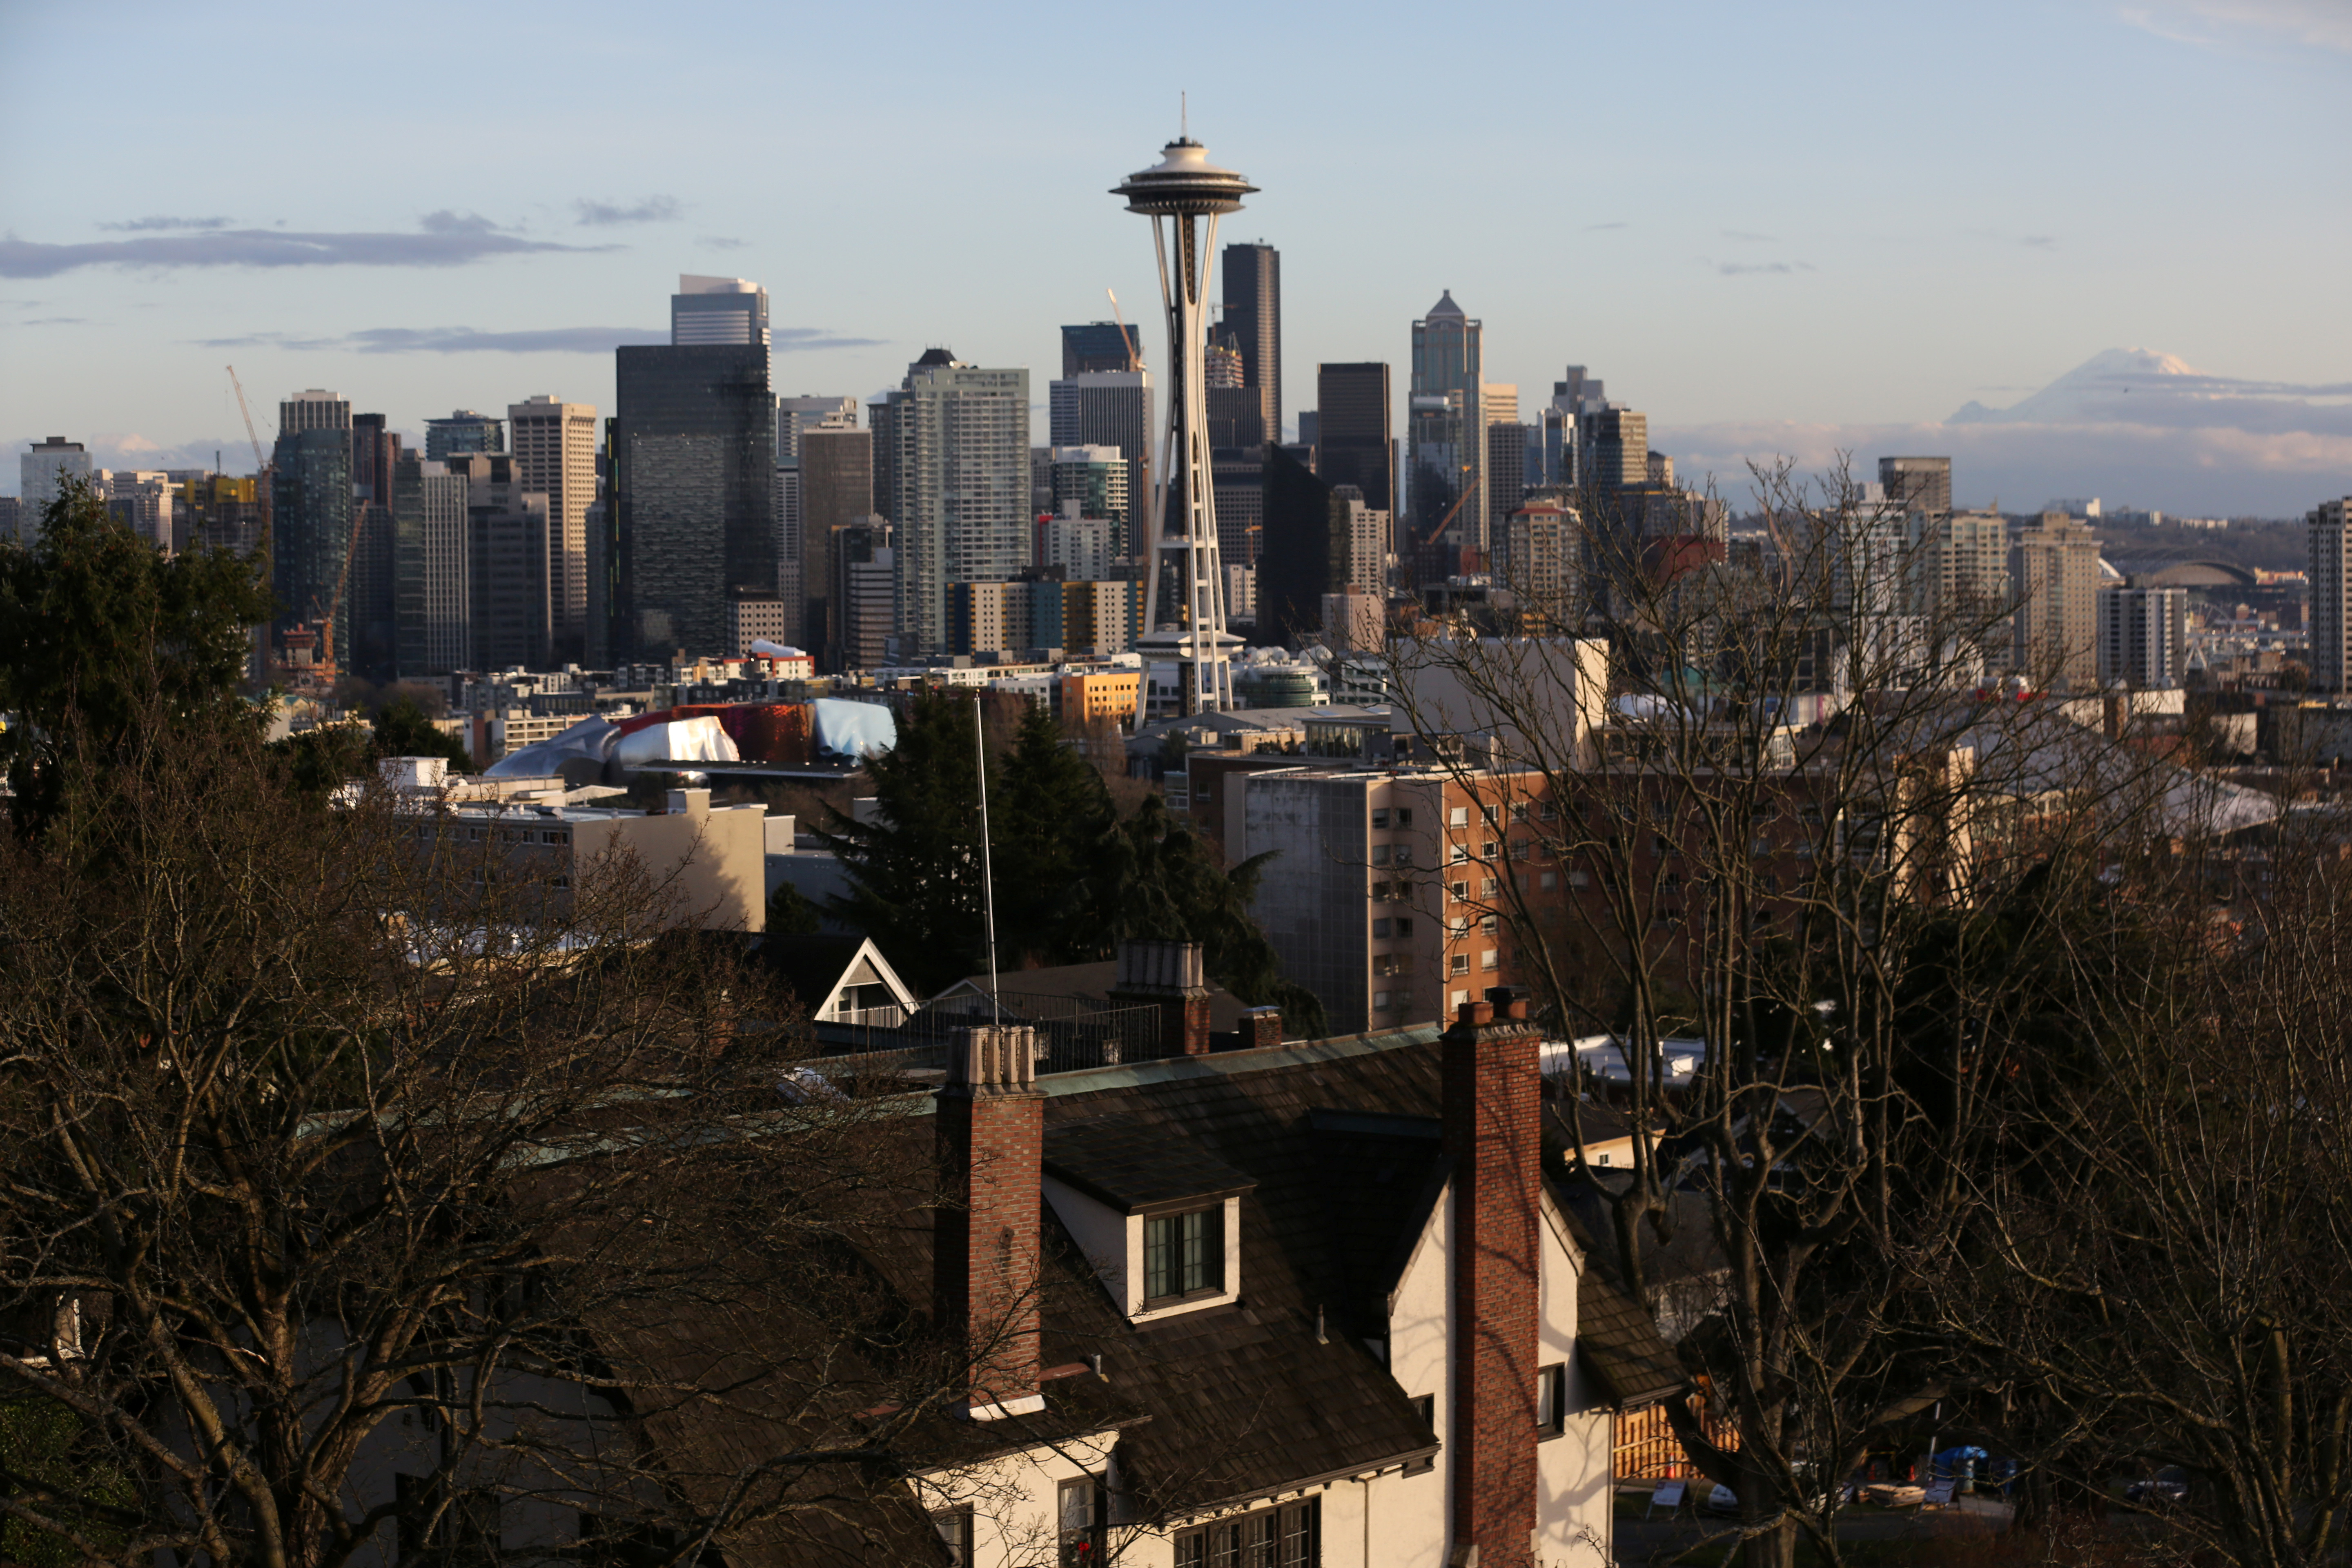 The Space Needle and Mount Rainier are seen on the skyline of Seattle